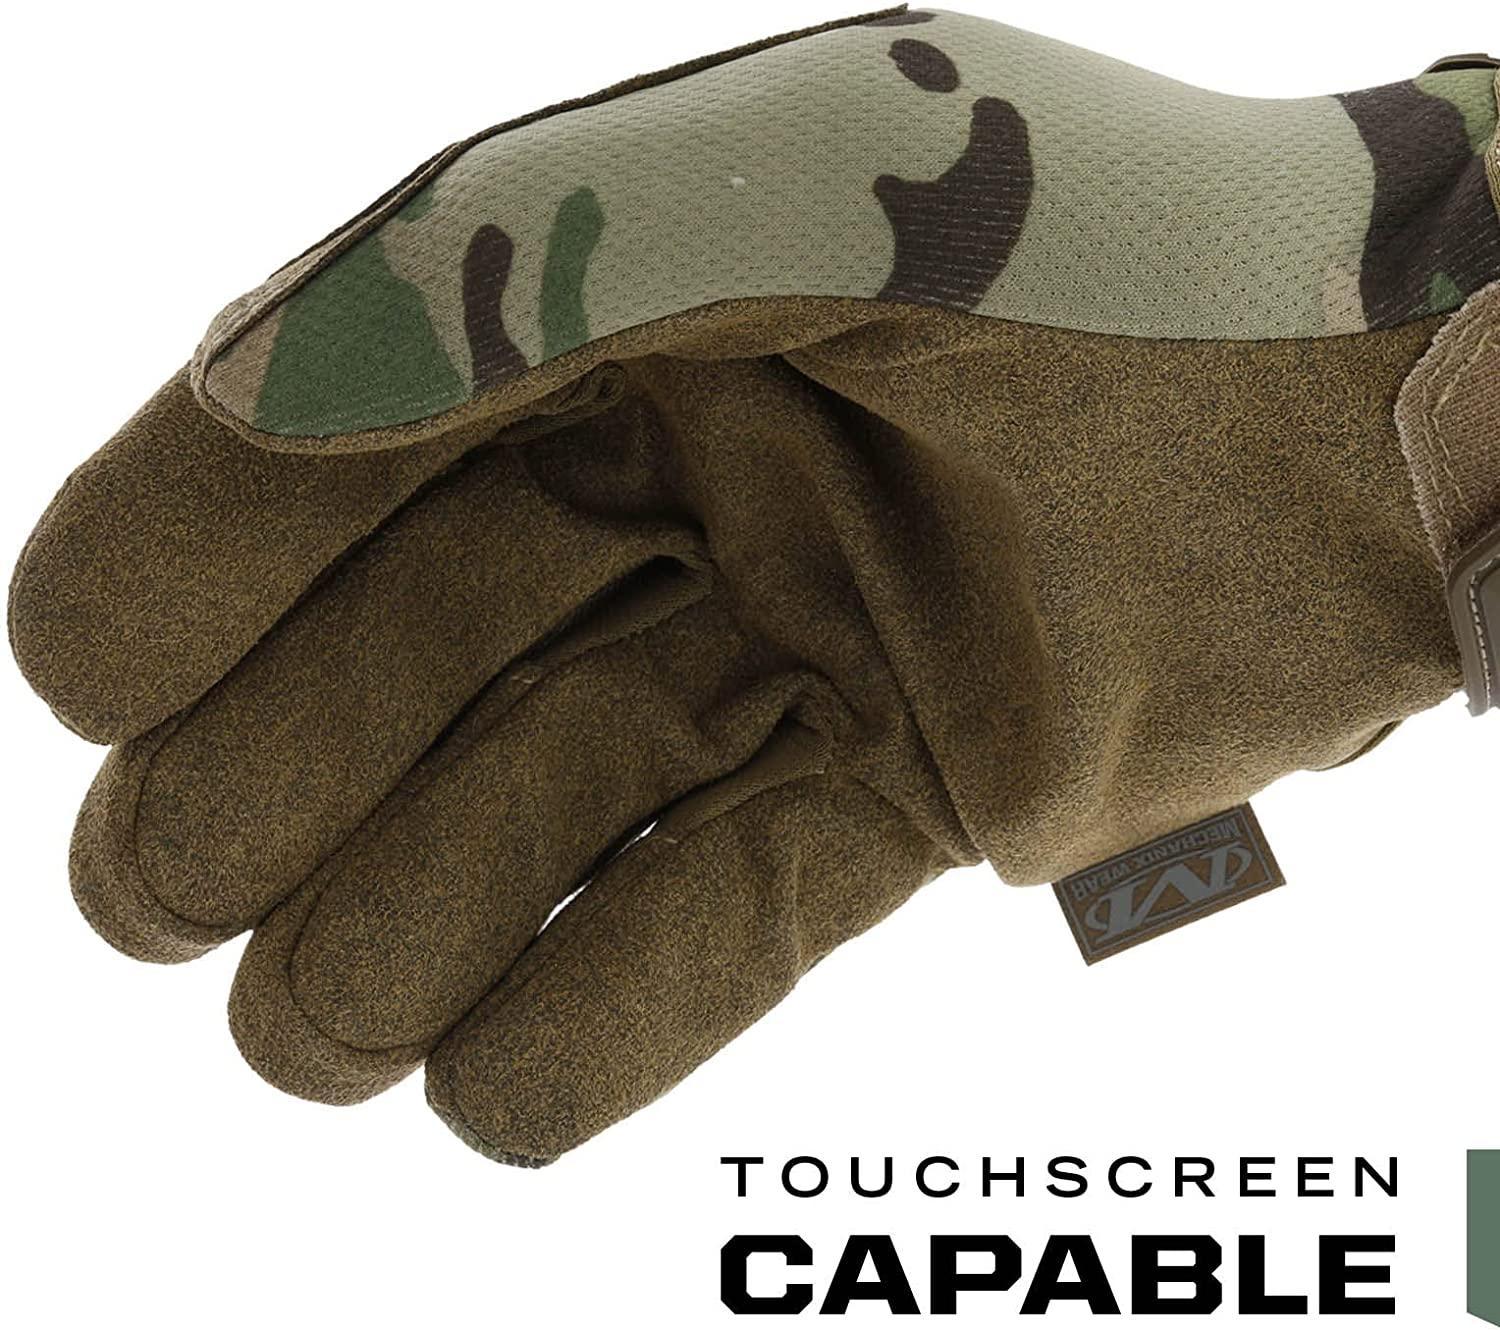 Mechanix Wear: The Original Tactical Work Gloves with Secure Fit, Flexible  Grip for Multi-Purpose Use, Durable Touchscreen Safety Gloves for Men  (Camouflage - MultiCam, Large)